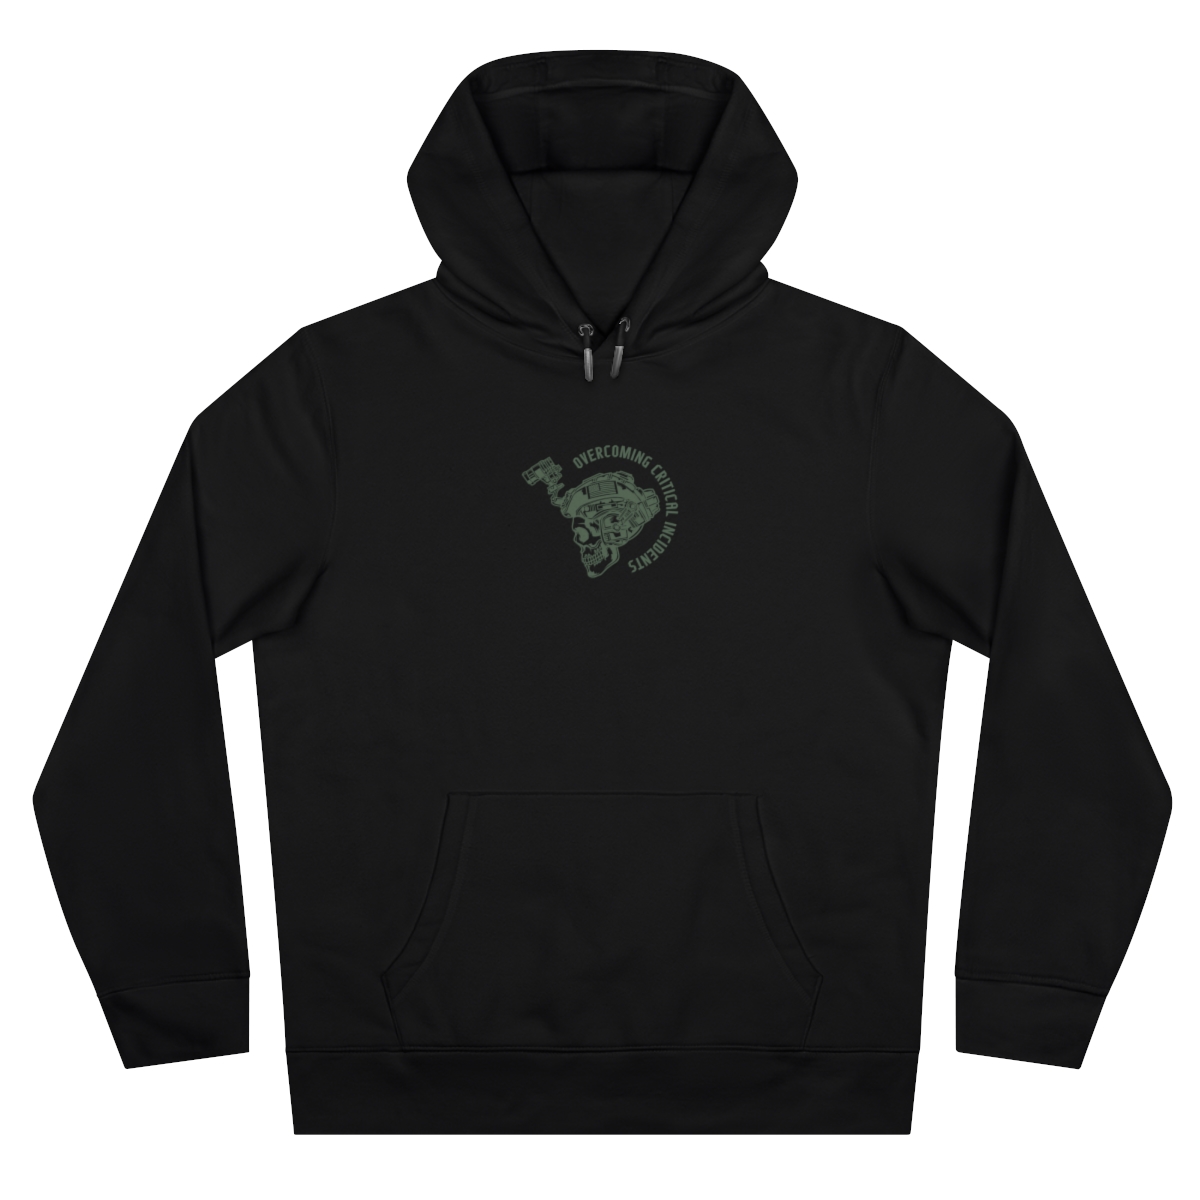  Hooded Sweatshirt "Surviving Critical Incidents" product main image